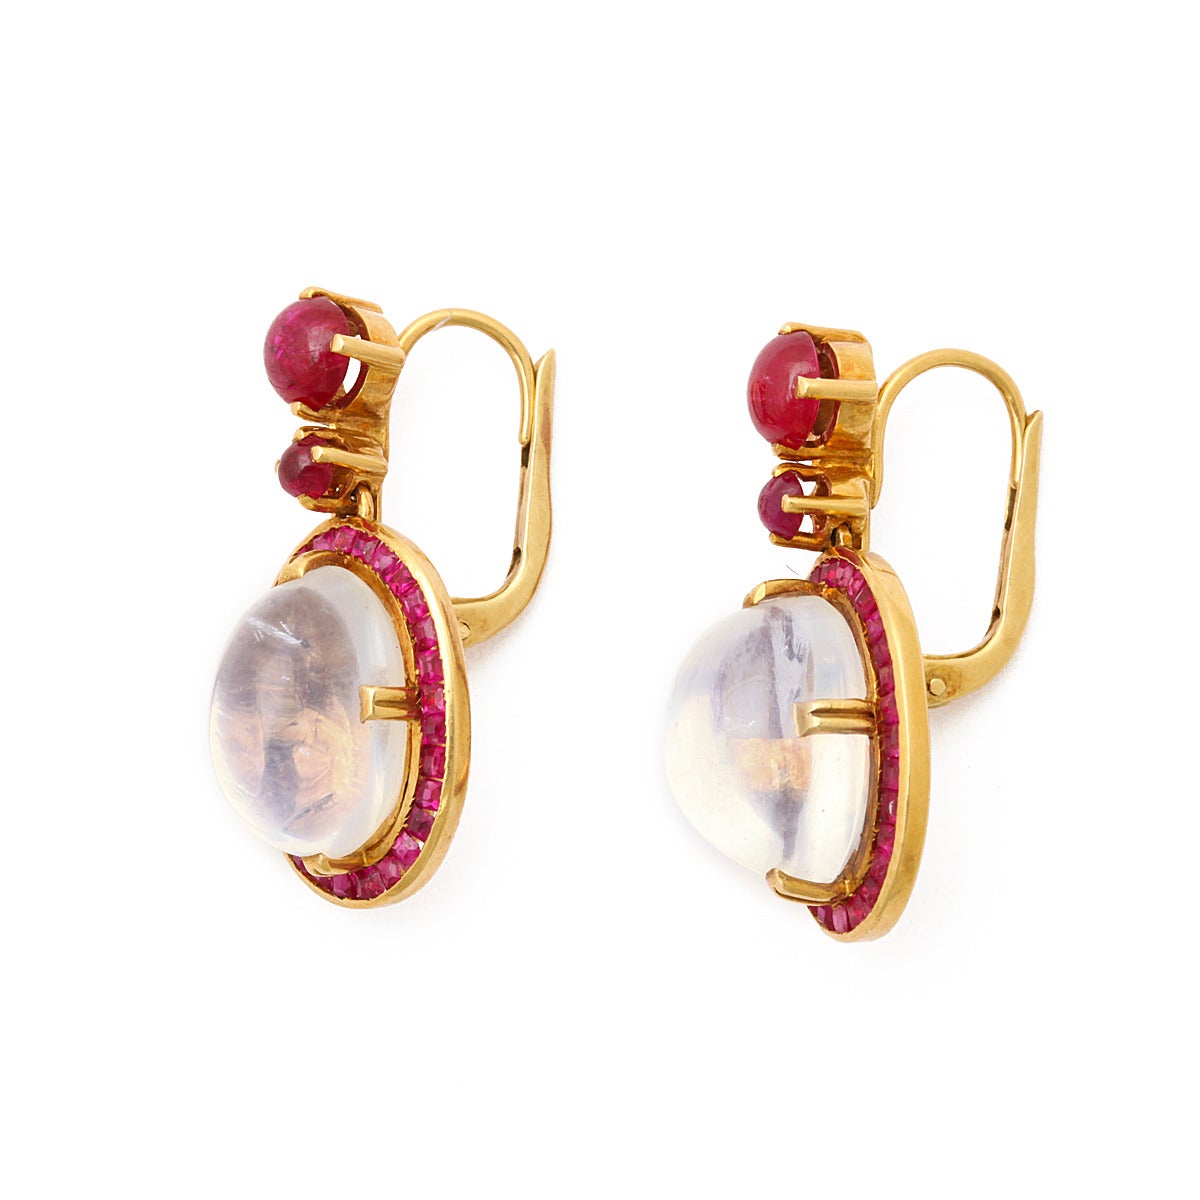 Victorian cabochon moonstone and cabochon ruby drop earrings, with calibre ruby border, set in gold.